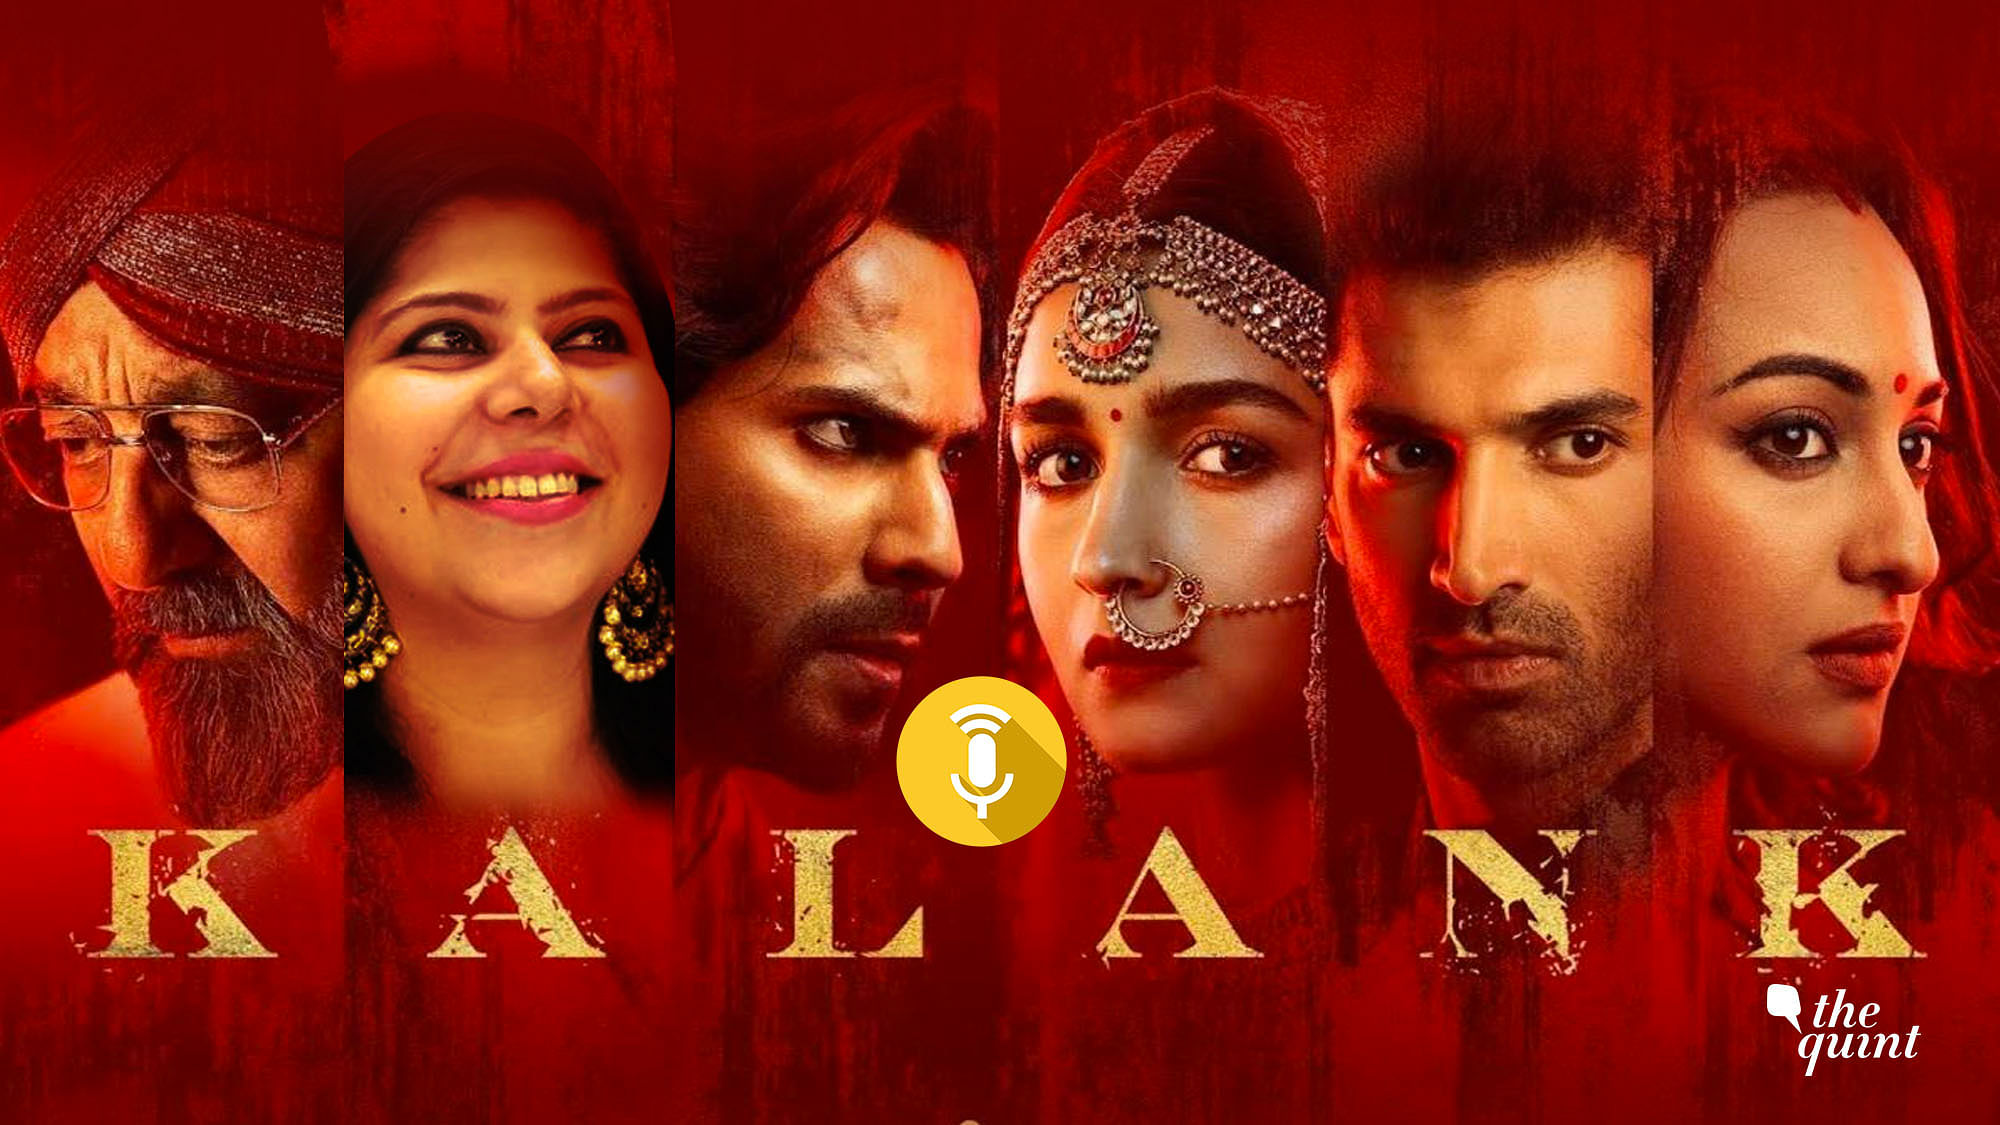 Is Kalank worth a watch? Well listen to the podcast review!